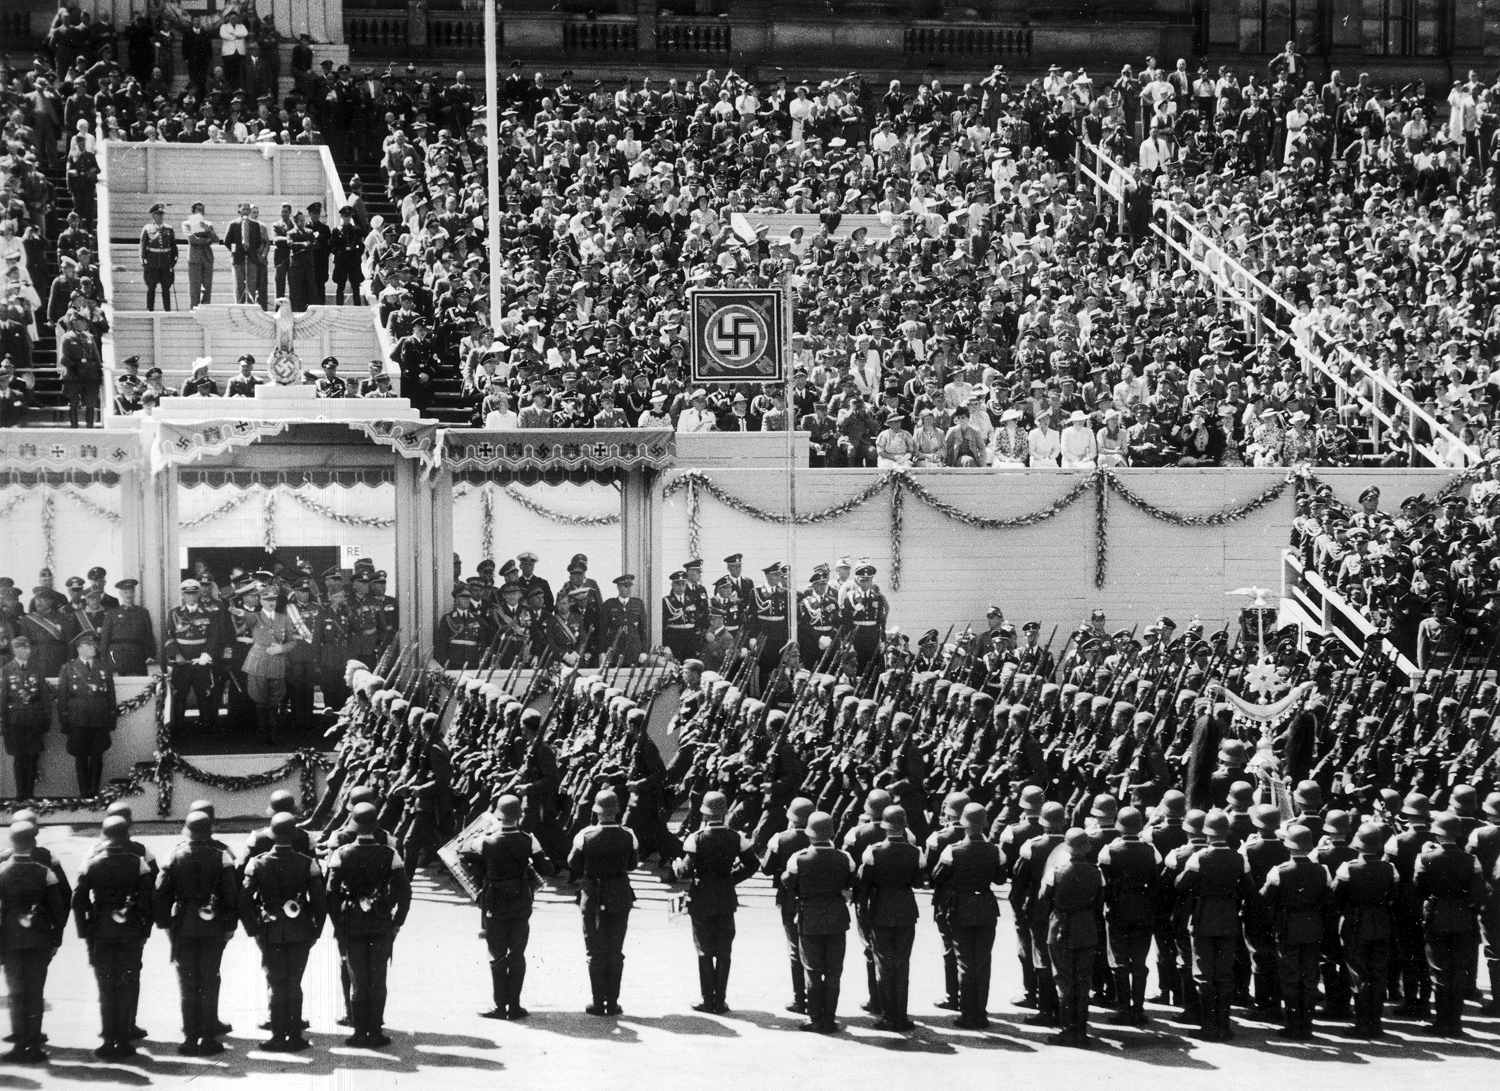 Parade of the Legion Condor in front of Berlin's Technische Hochschule in Charlottenburg, Adolf Hitler is in the tribune with officials and guests